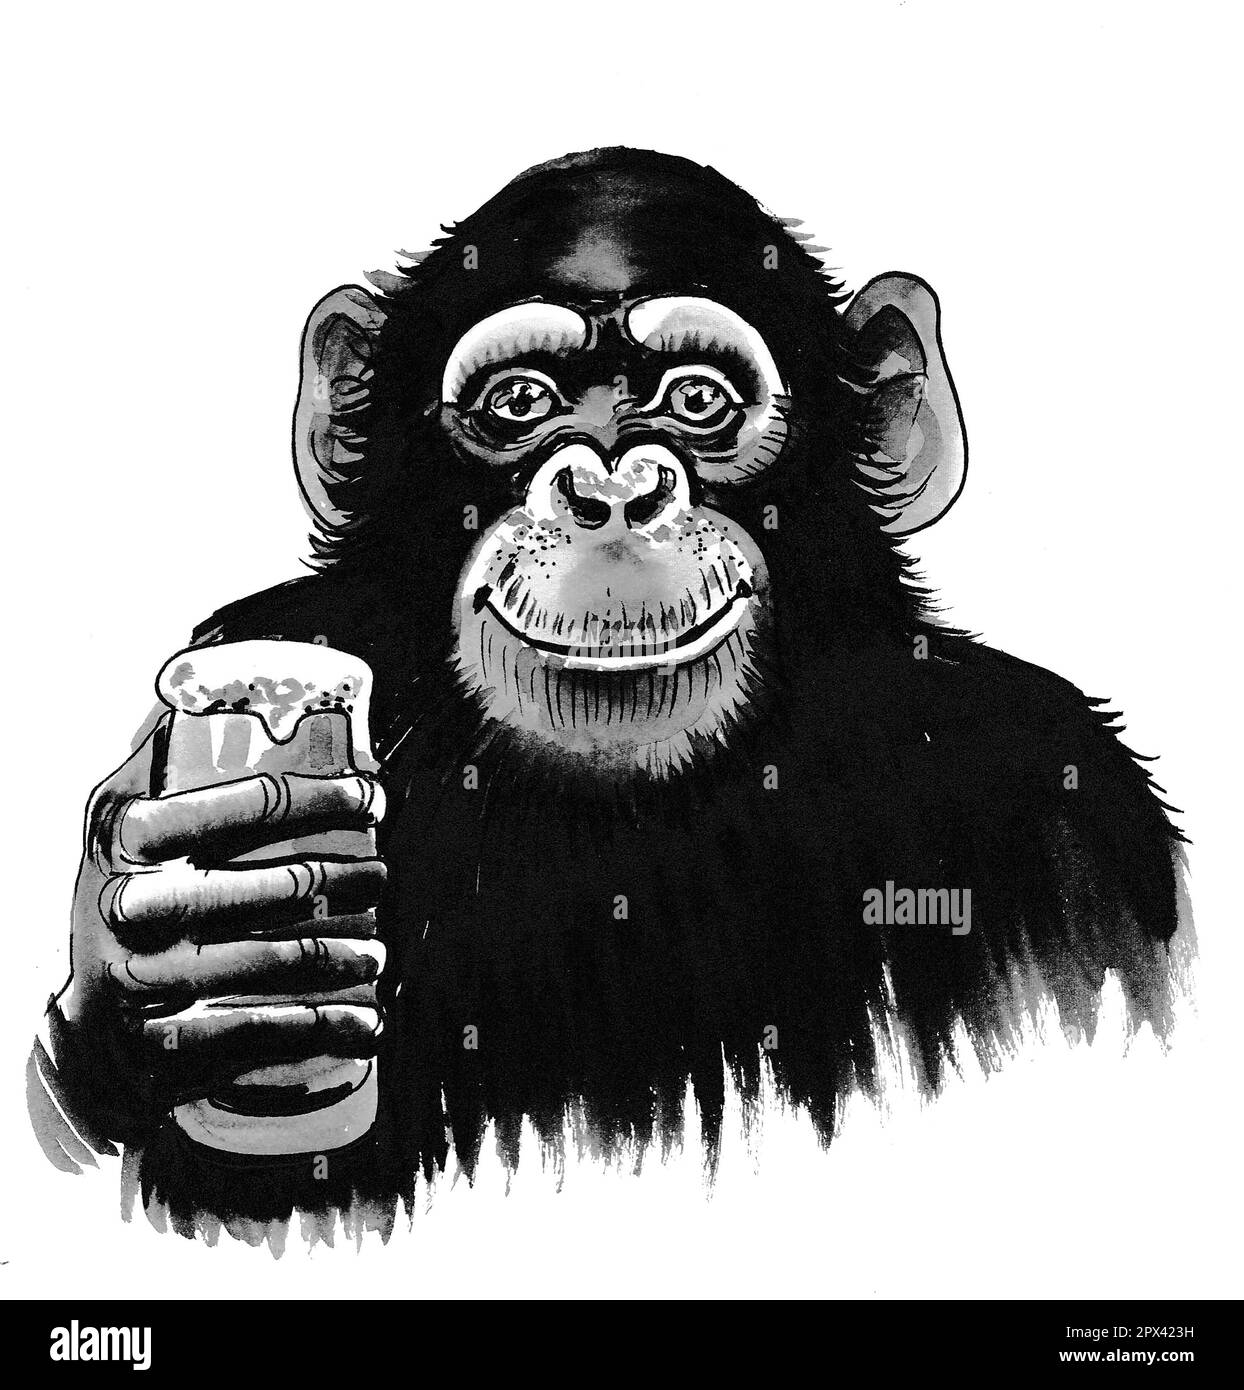 Chimpanzee drinking a glass of beer. Hand-drawn ink on paper black and white illustration Stock Photo